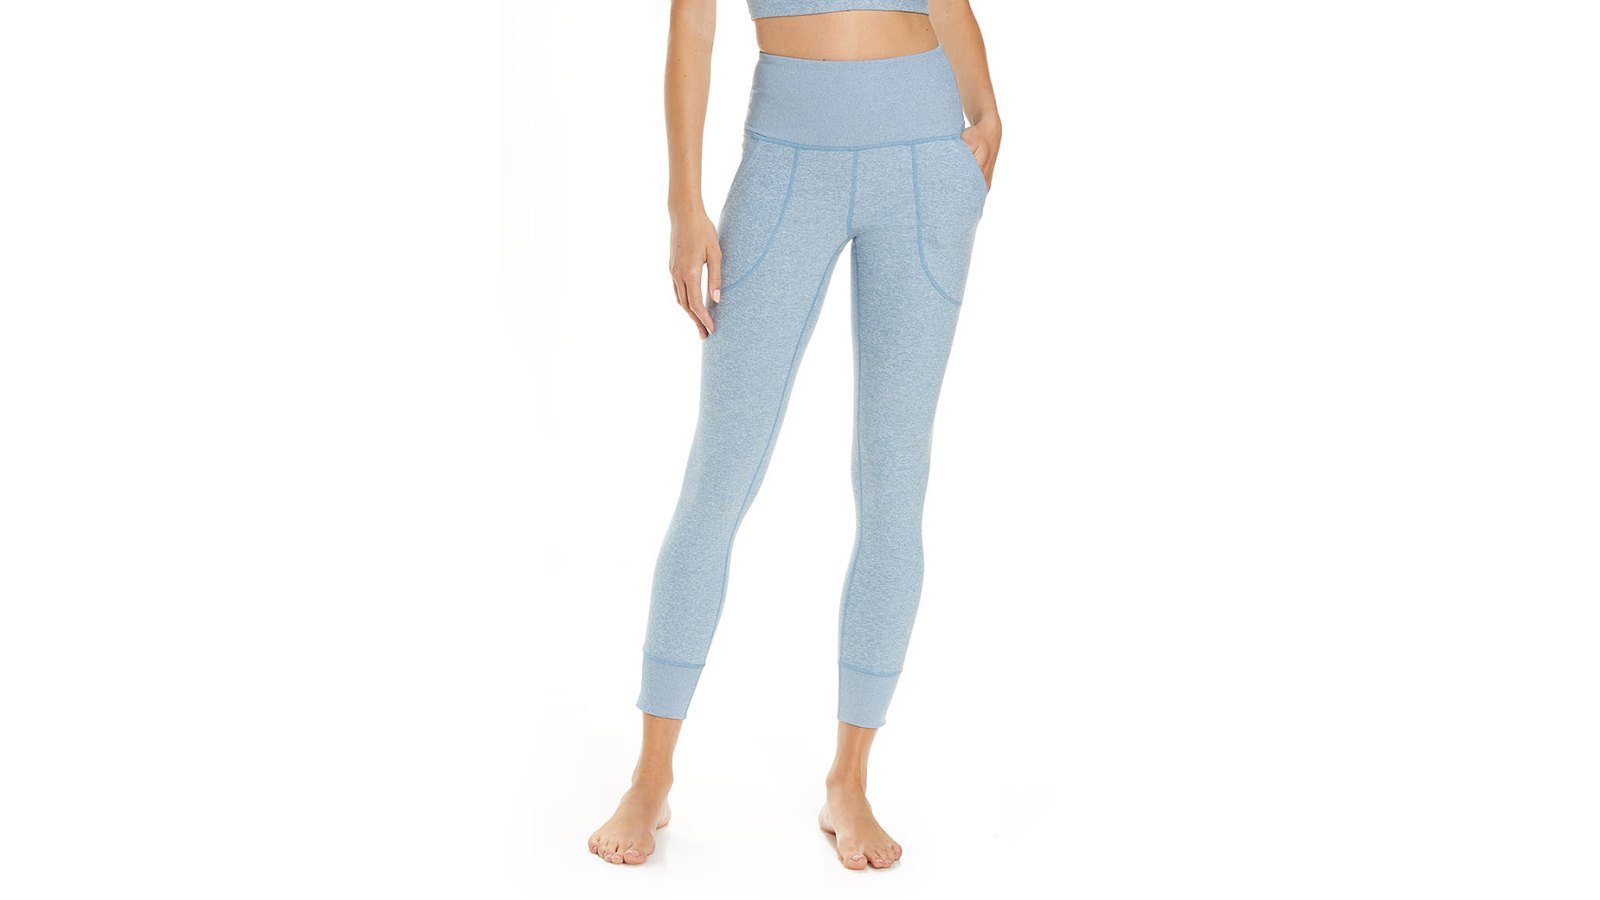 Nordstrom Zella leggings reviews: Why they're so popular